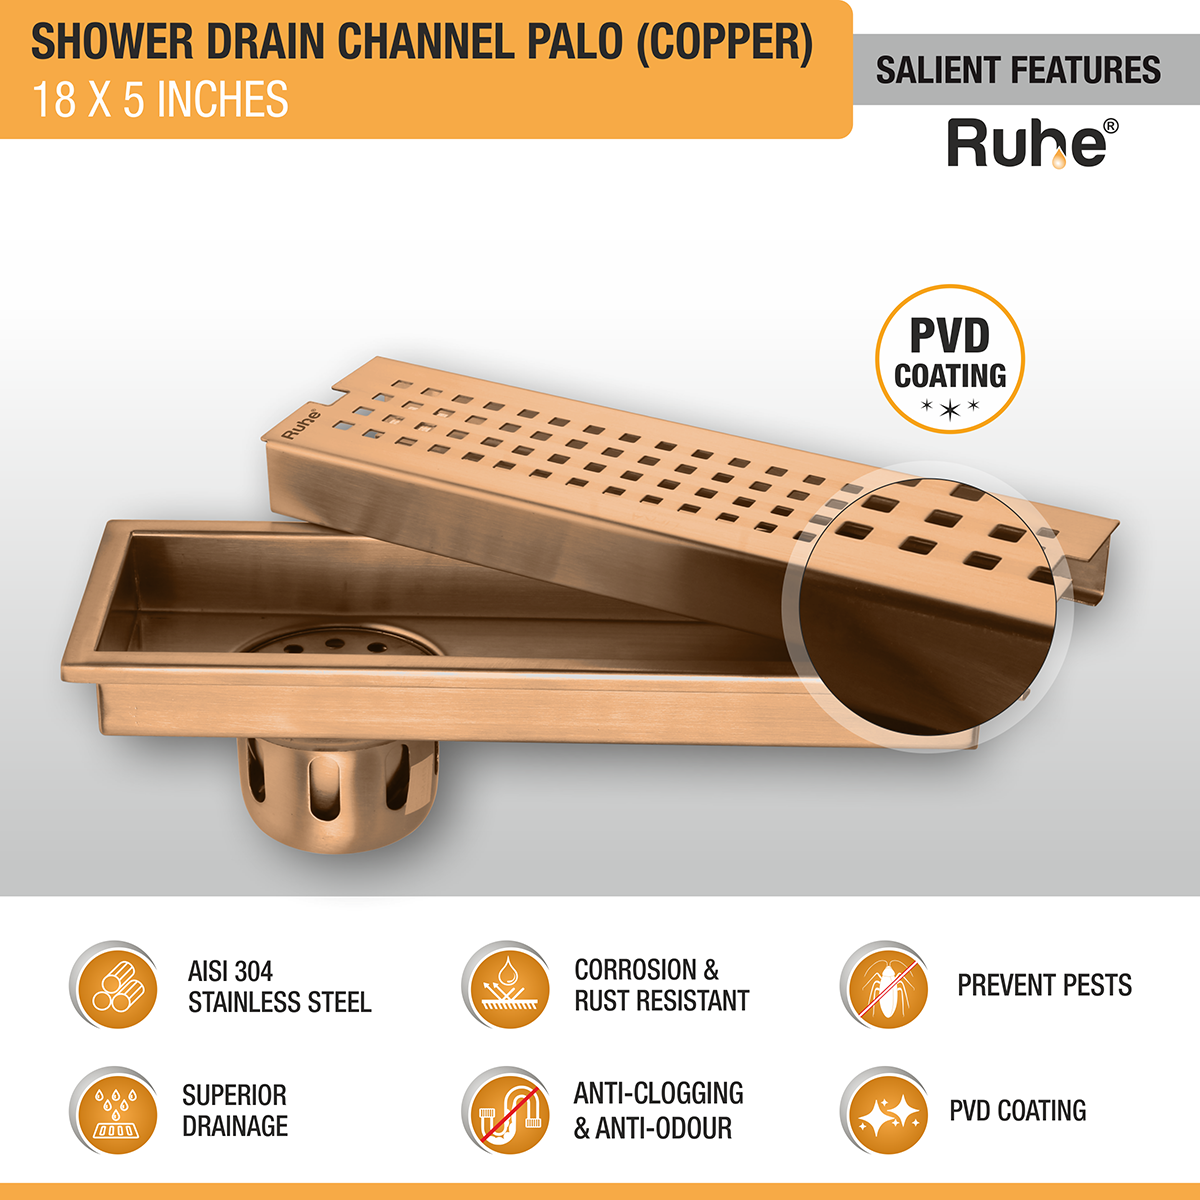 Palo Shower Drain Channel (18 x 5 Inches) ROSE GOLD/ANTIQUE COPPER features